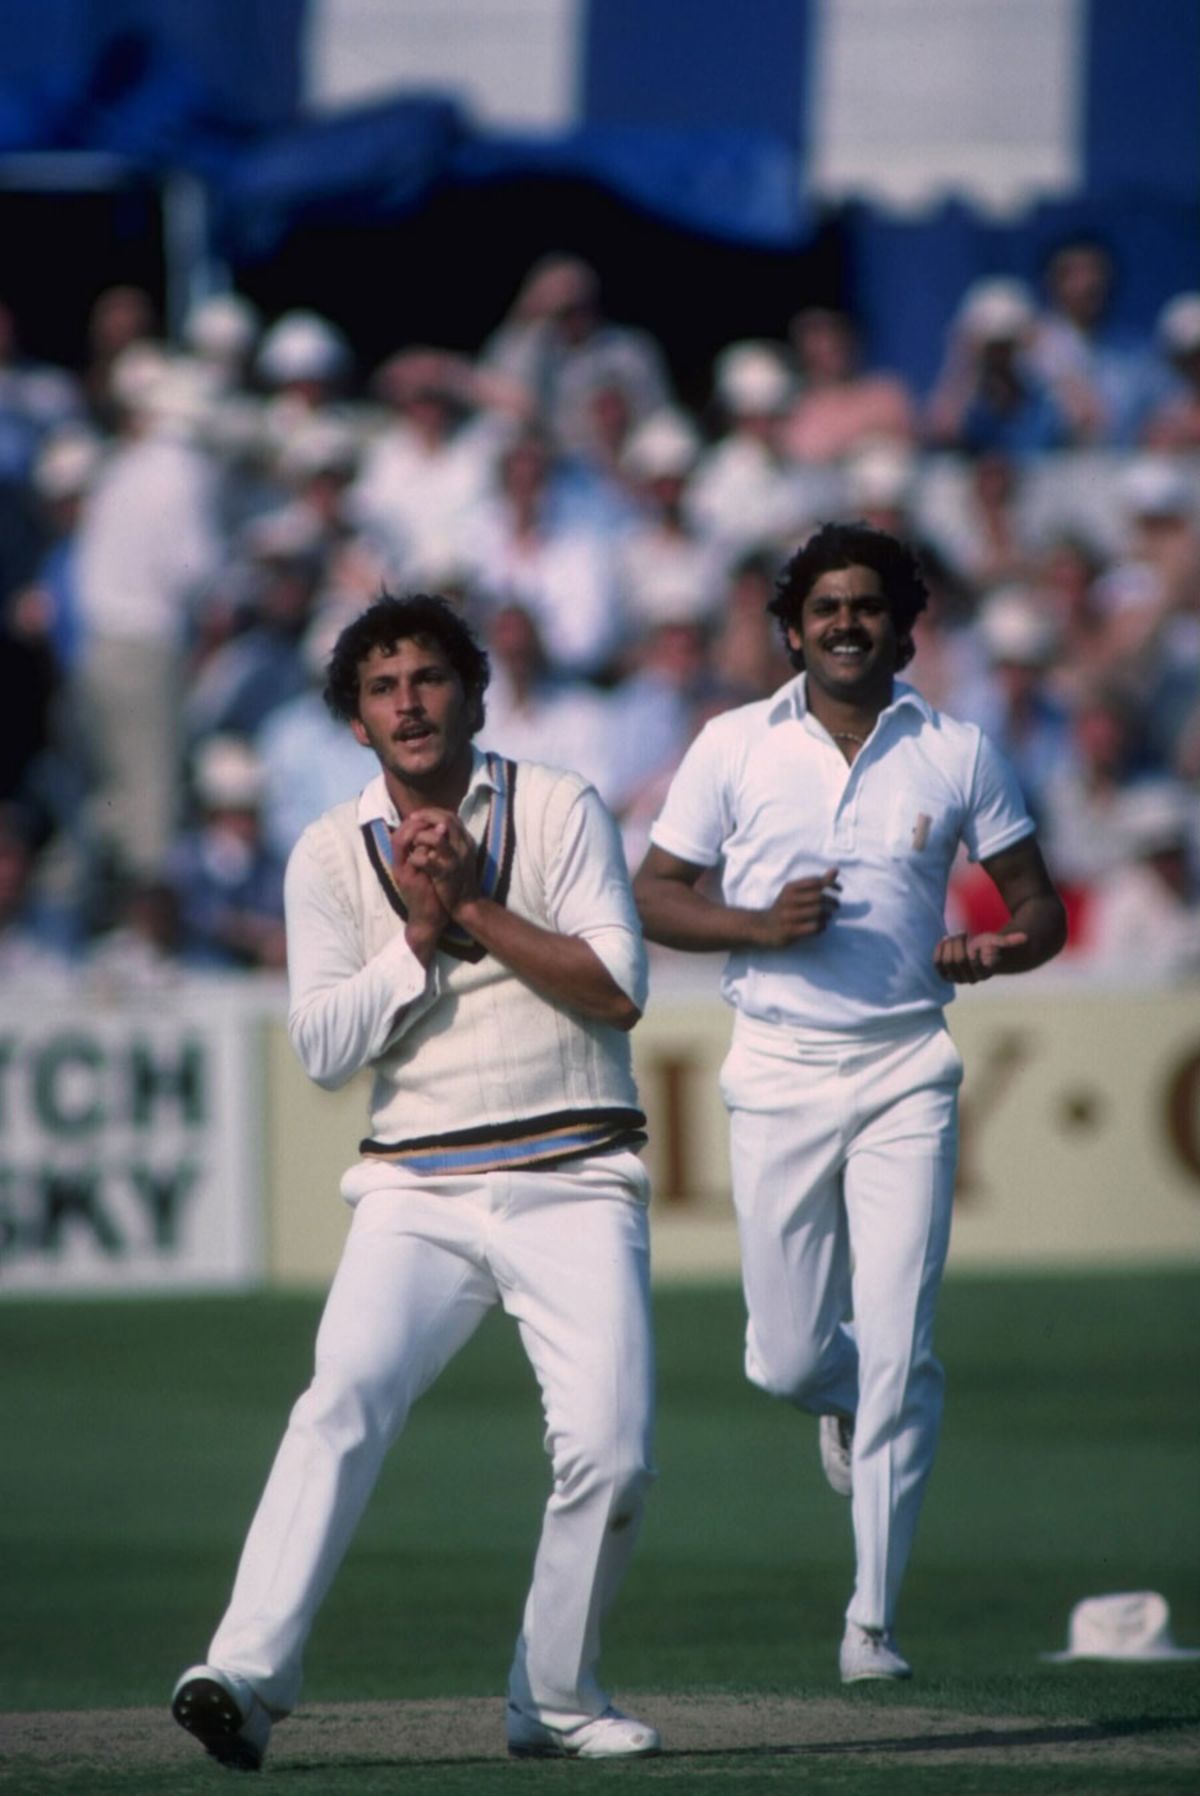 Roger Binny was the highest wicket taker in the 1983 World Cup picking up 18 wickets.